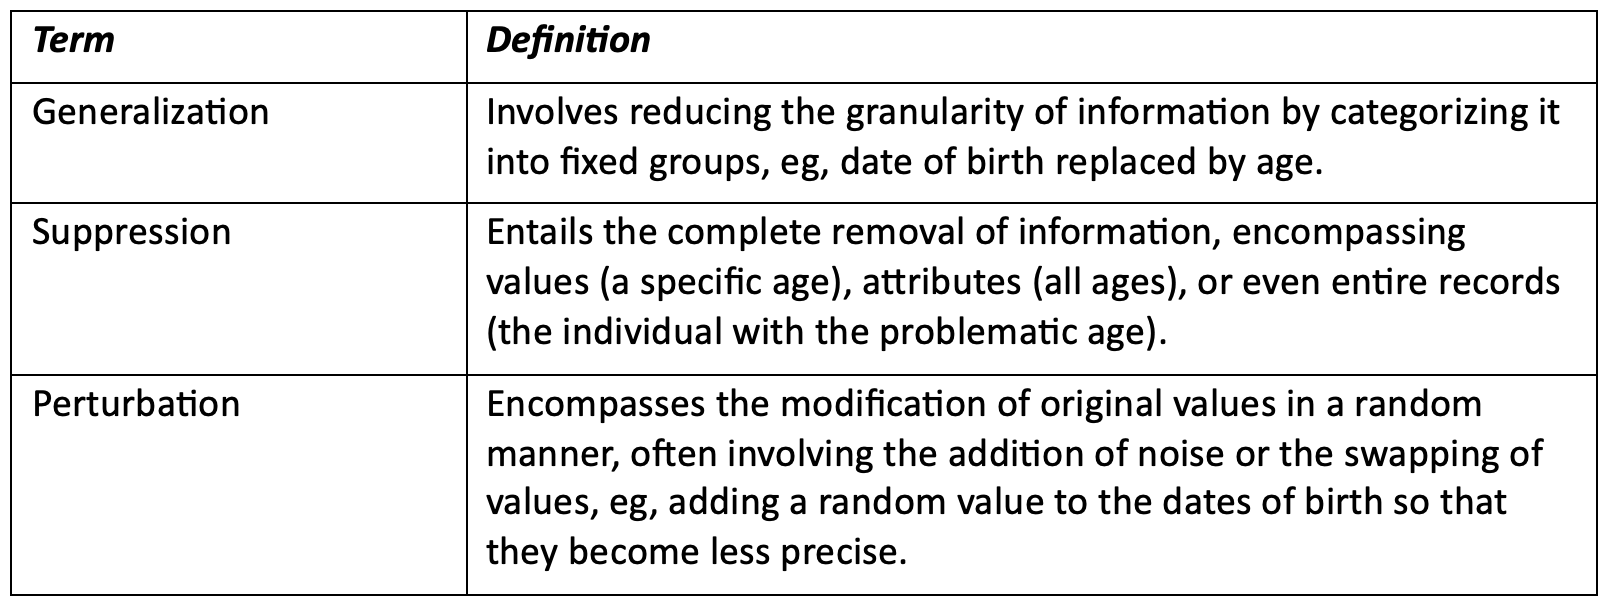 Table 2. Selected terms and definitions for IPD anonymization.